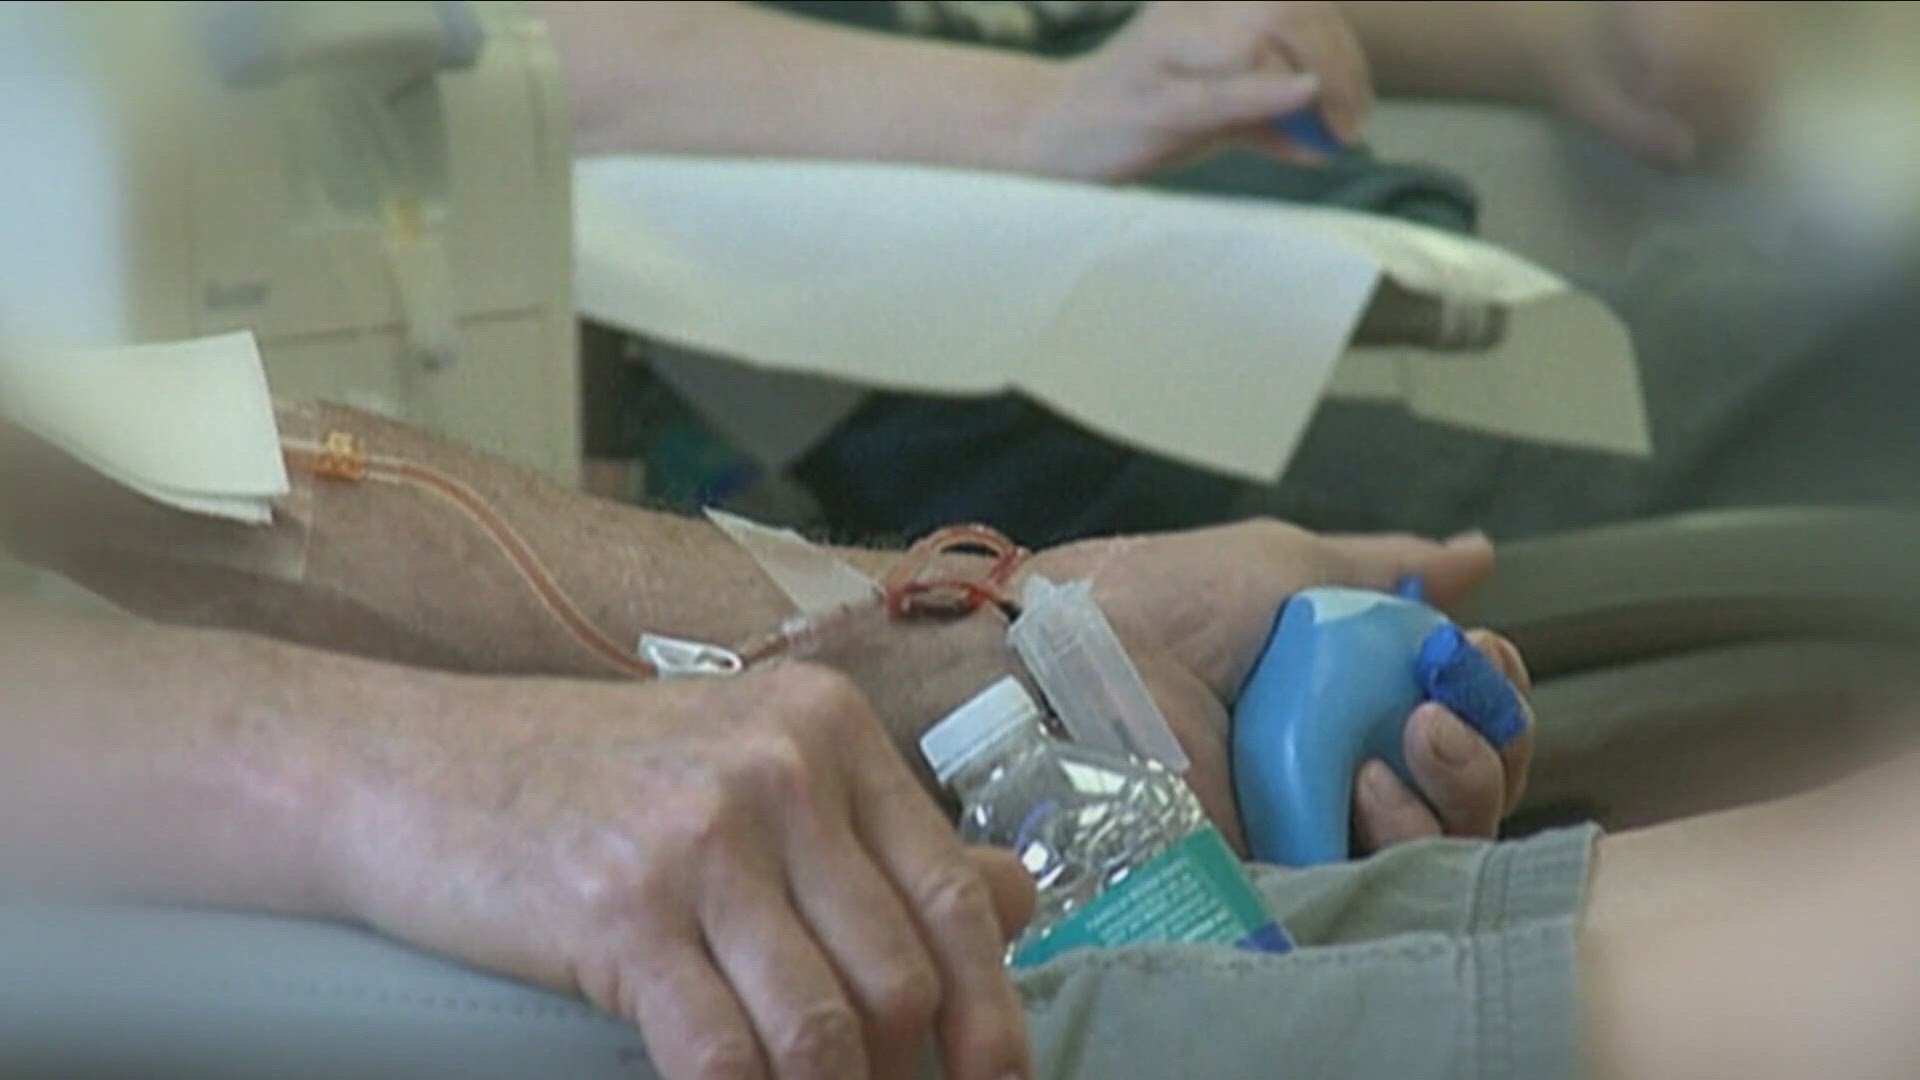 Erie County Sheriff's Office teams up with ConnectLife to host a blood drive.